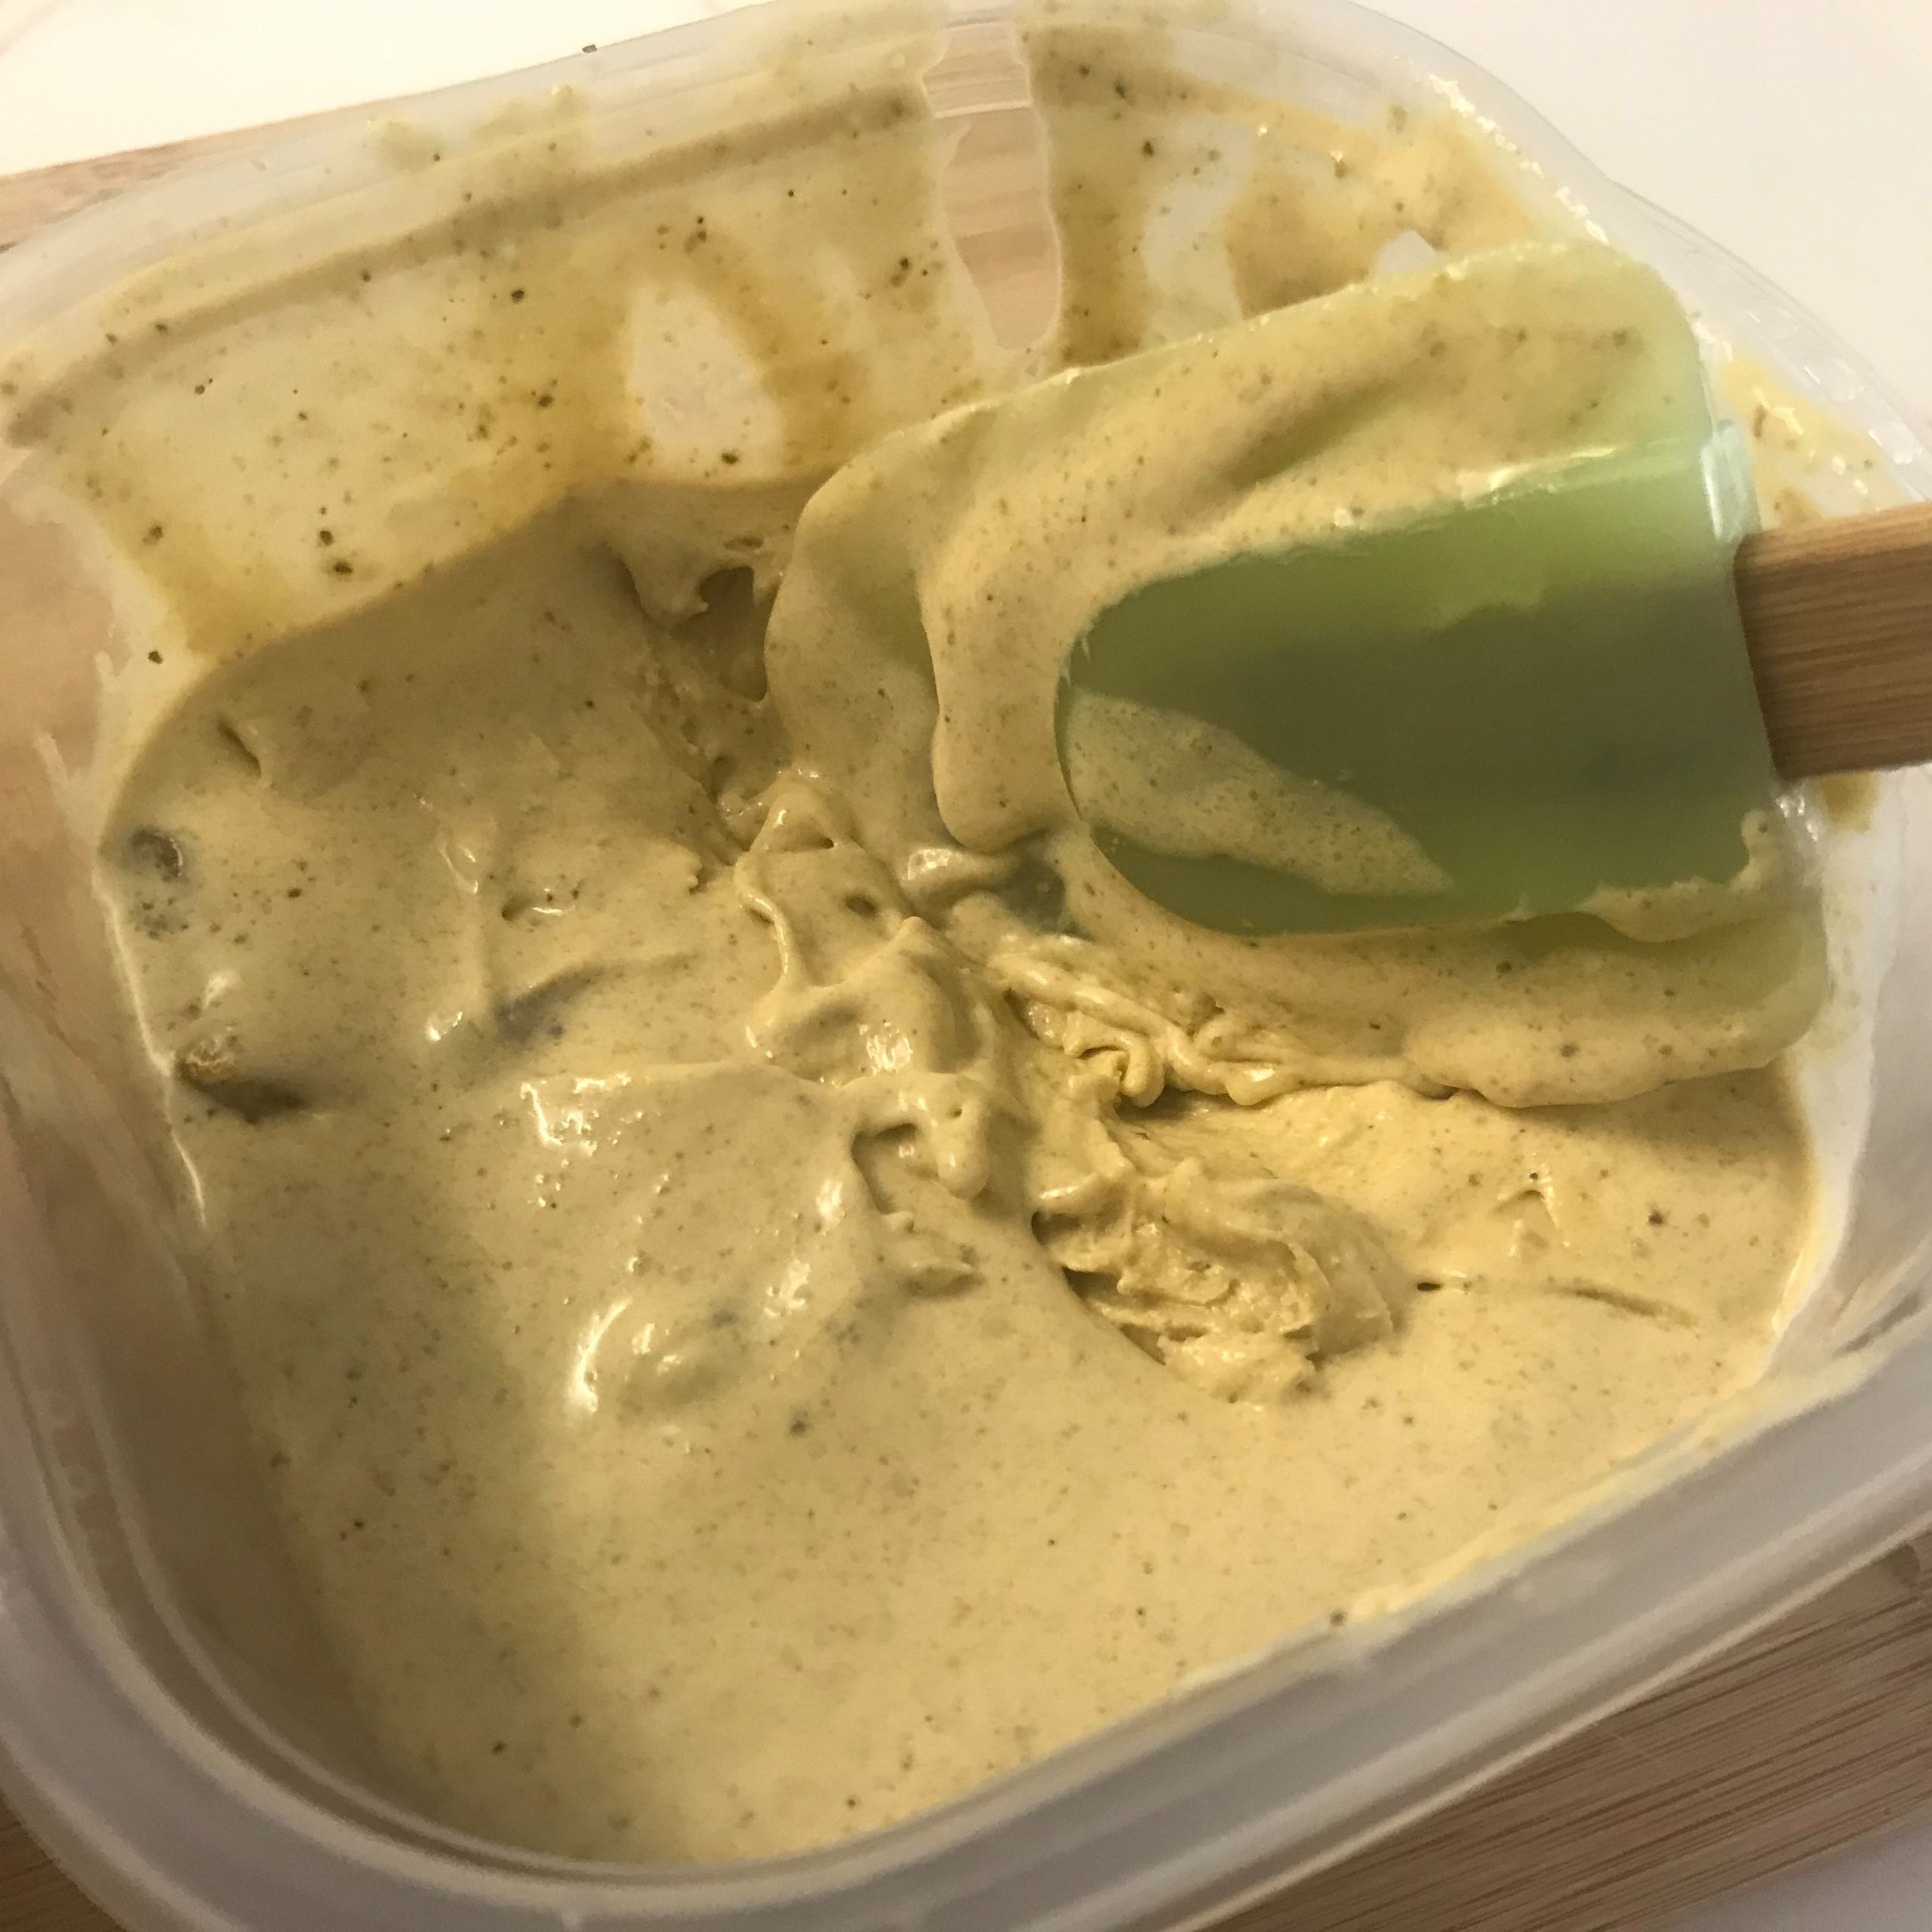 container of ice cream ready for freezer | my curated tastes